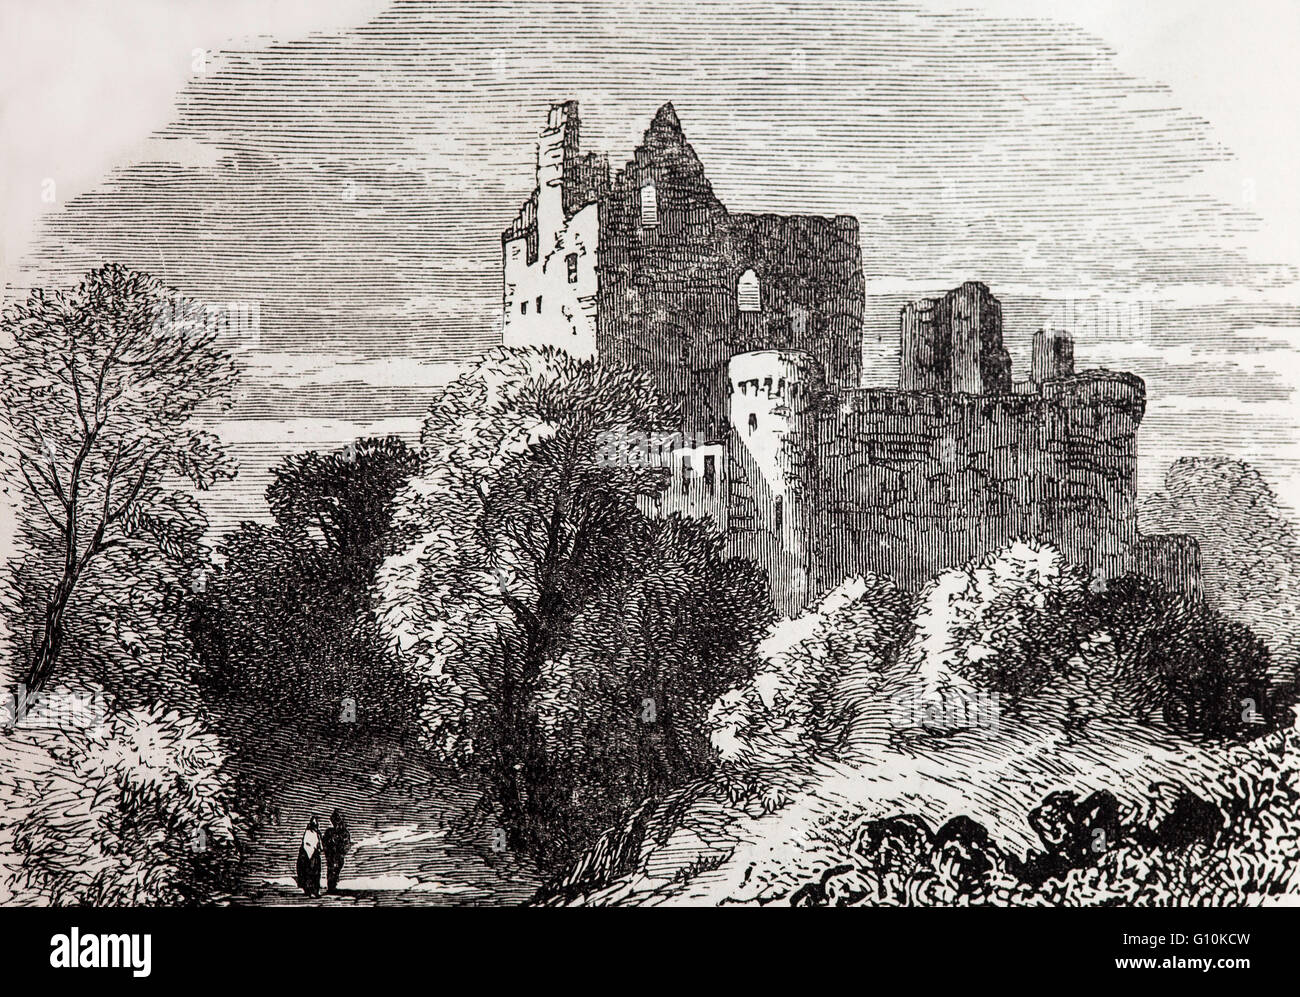 19th Century view of Craigmillar Castle is a ruined medieval castle began in the late 14th century. Sold to Sir John Gilmour, Lord President of the Court of Session in 1660, left in the 18th century, the castle fell into ruin, Edinburgh, Scotland Stock Photo